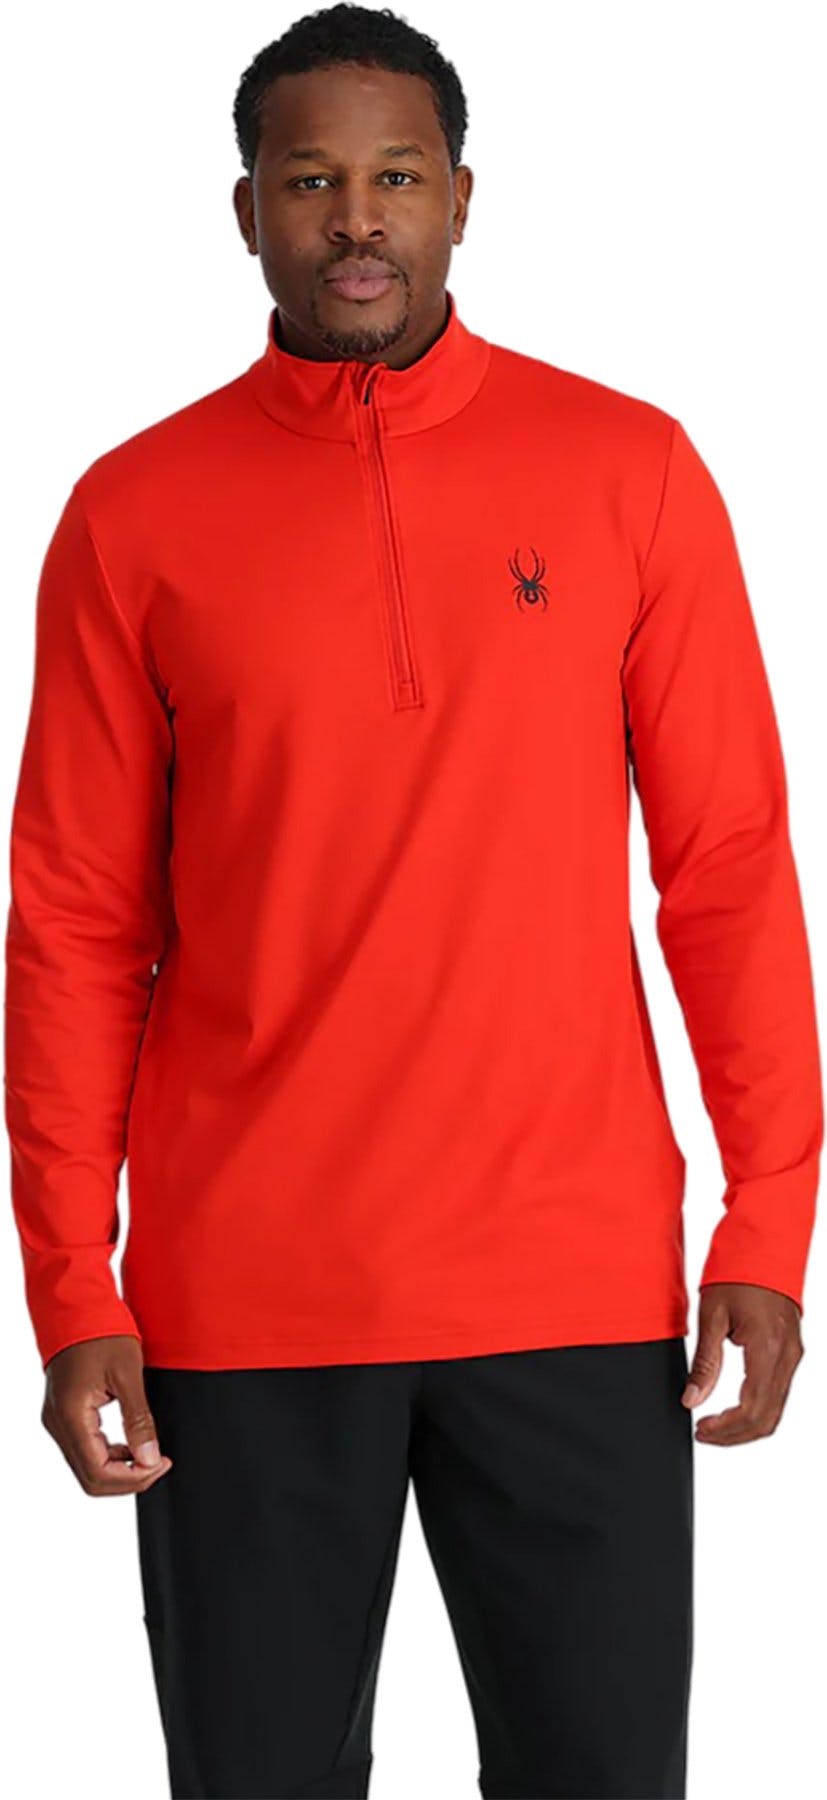 Product image for Prospect Half Zip Base Layer Top - Men's